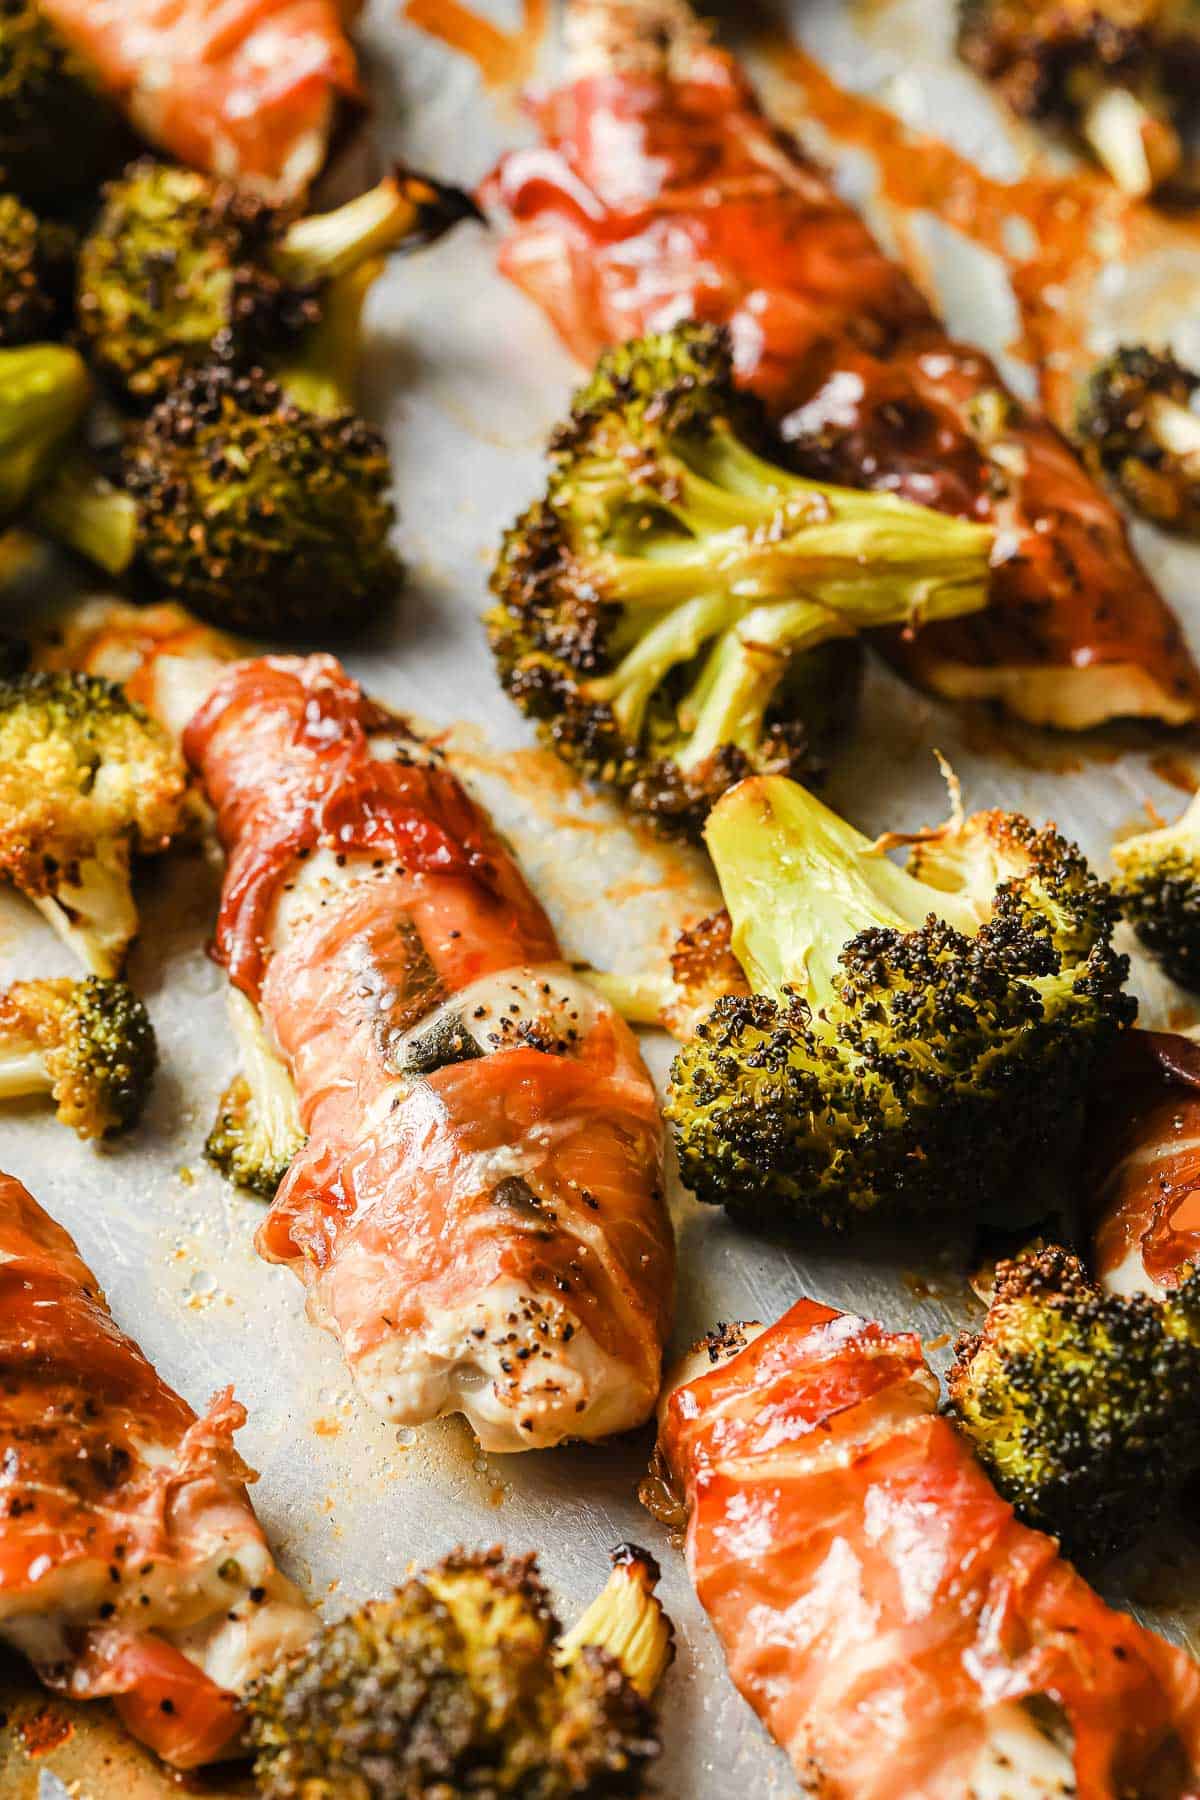 a rimmed baking sheet with roasted broccoli and prosciutto wrapped chicken.